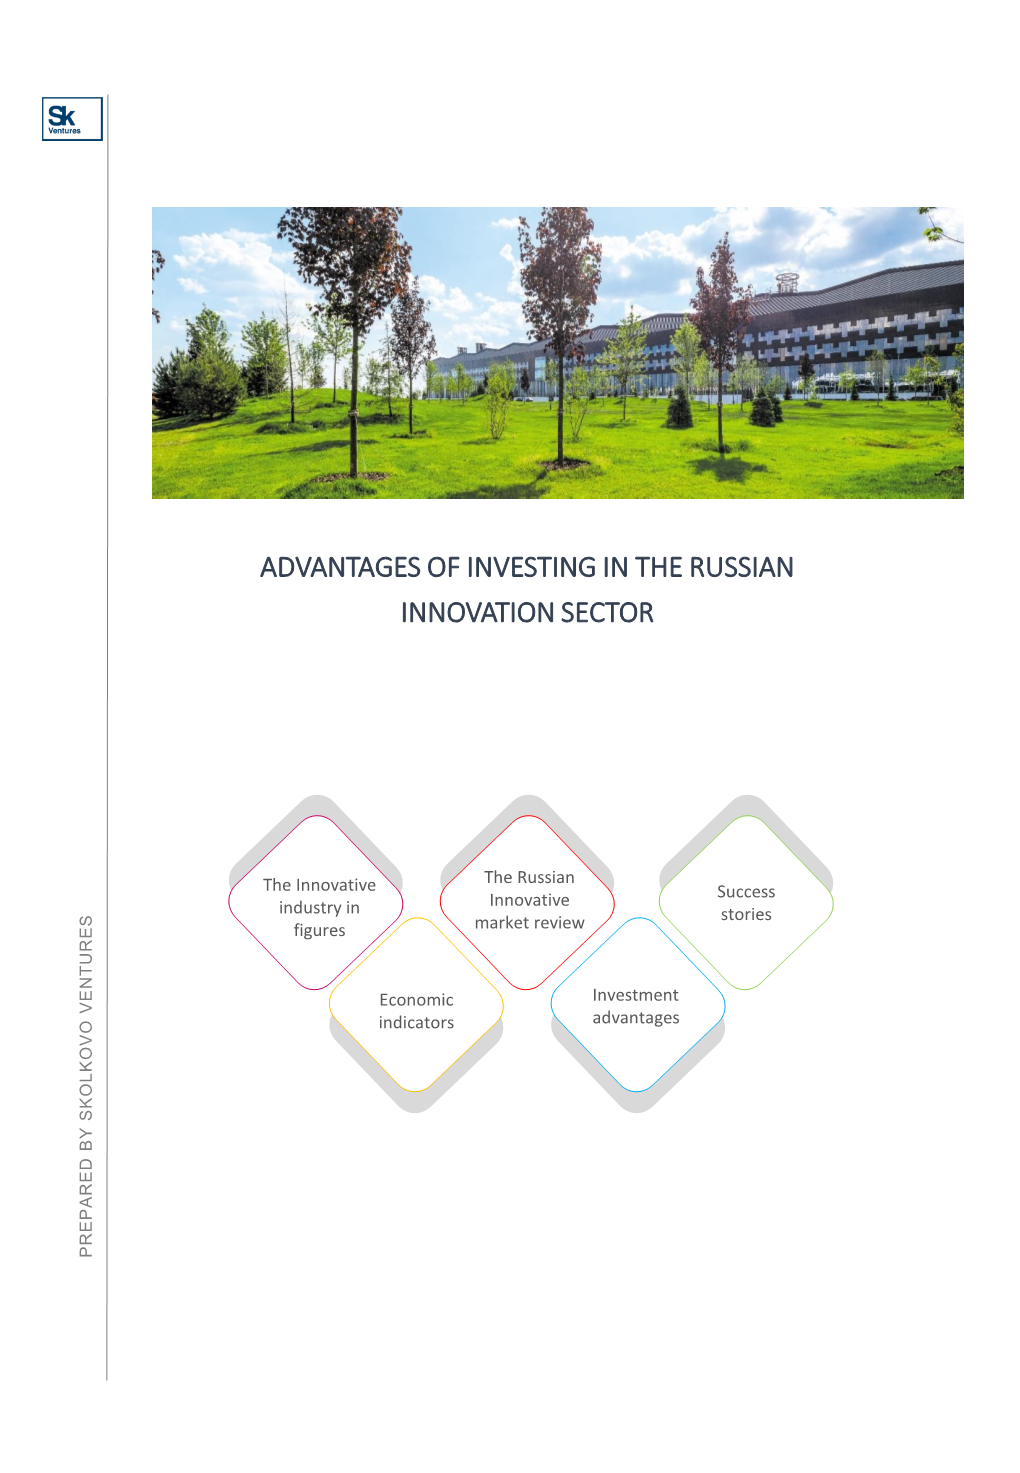 Advantages of Investing in the Russian Innovation Sector